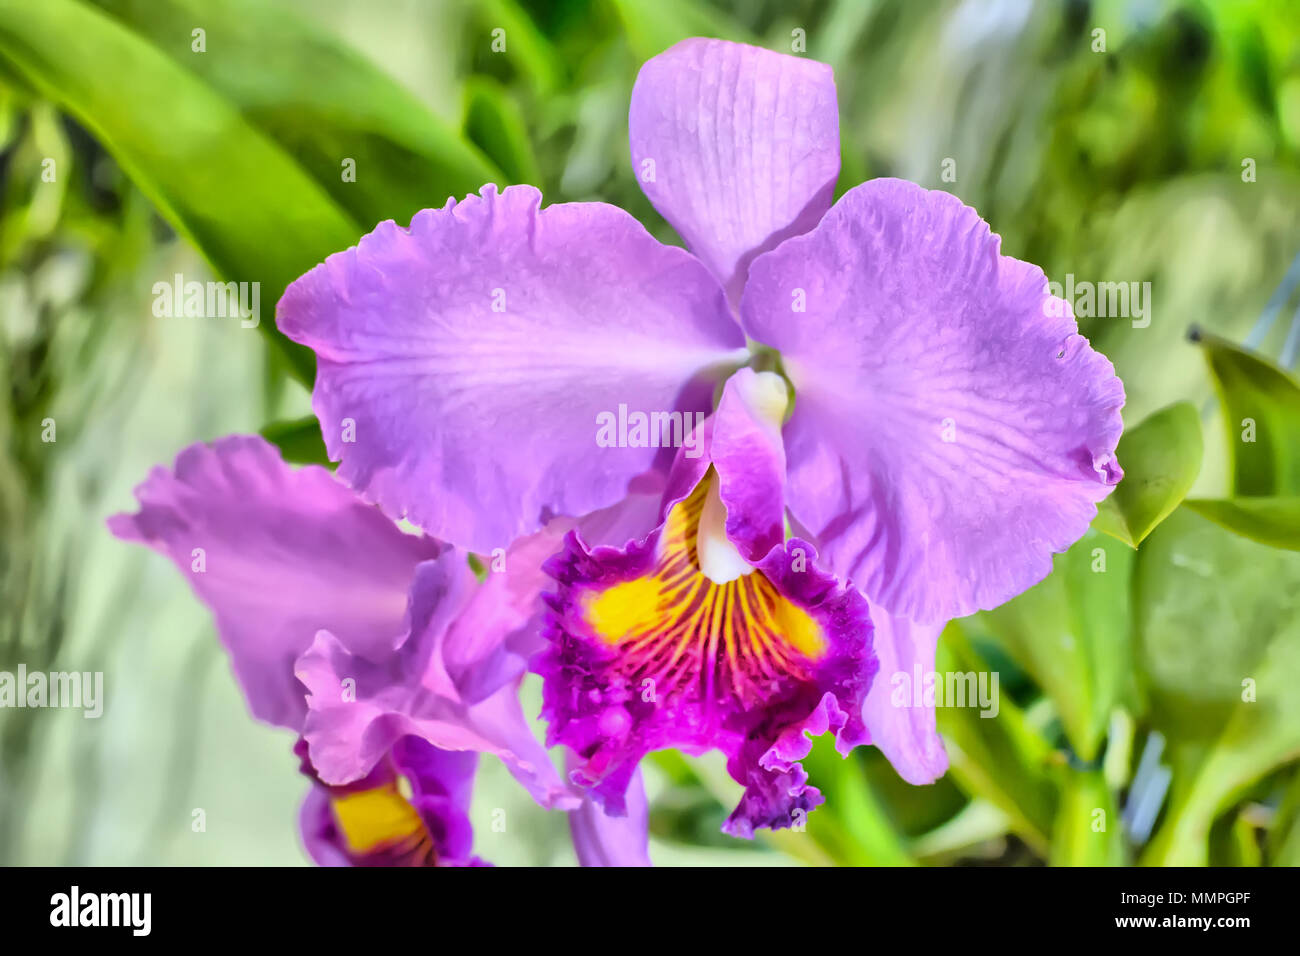 Cattleya orchids bloom on a nature background. Stock Photo